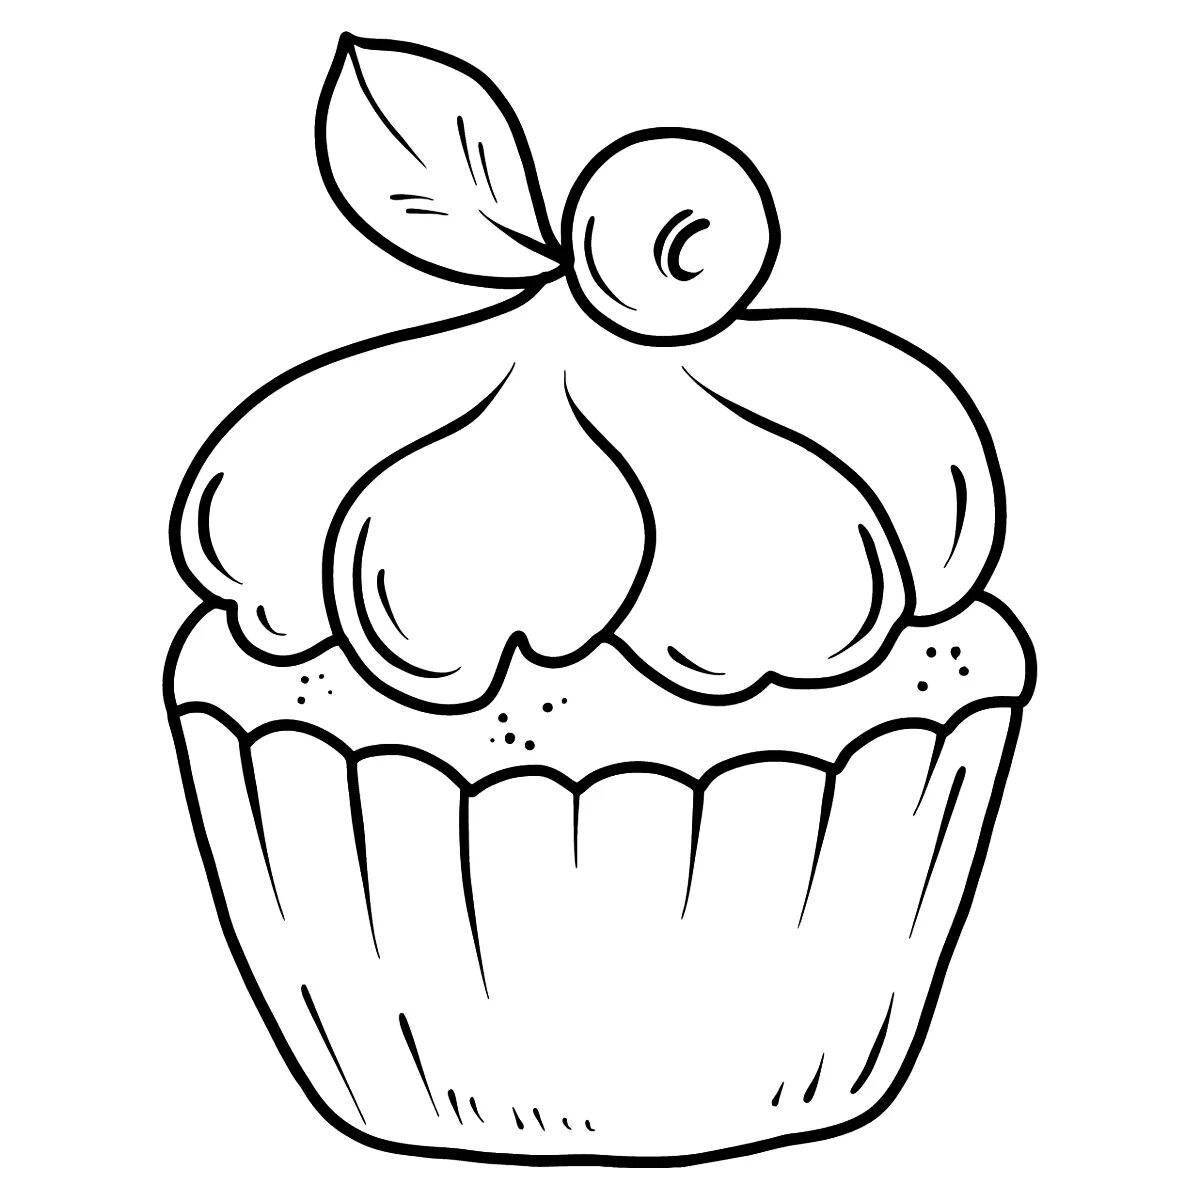 Holiday cupcake coloring book for kids